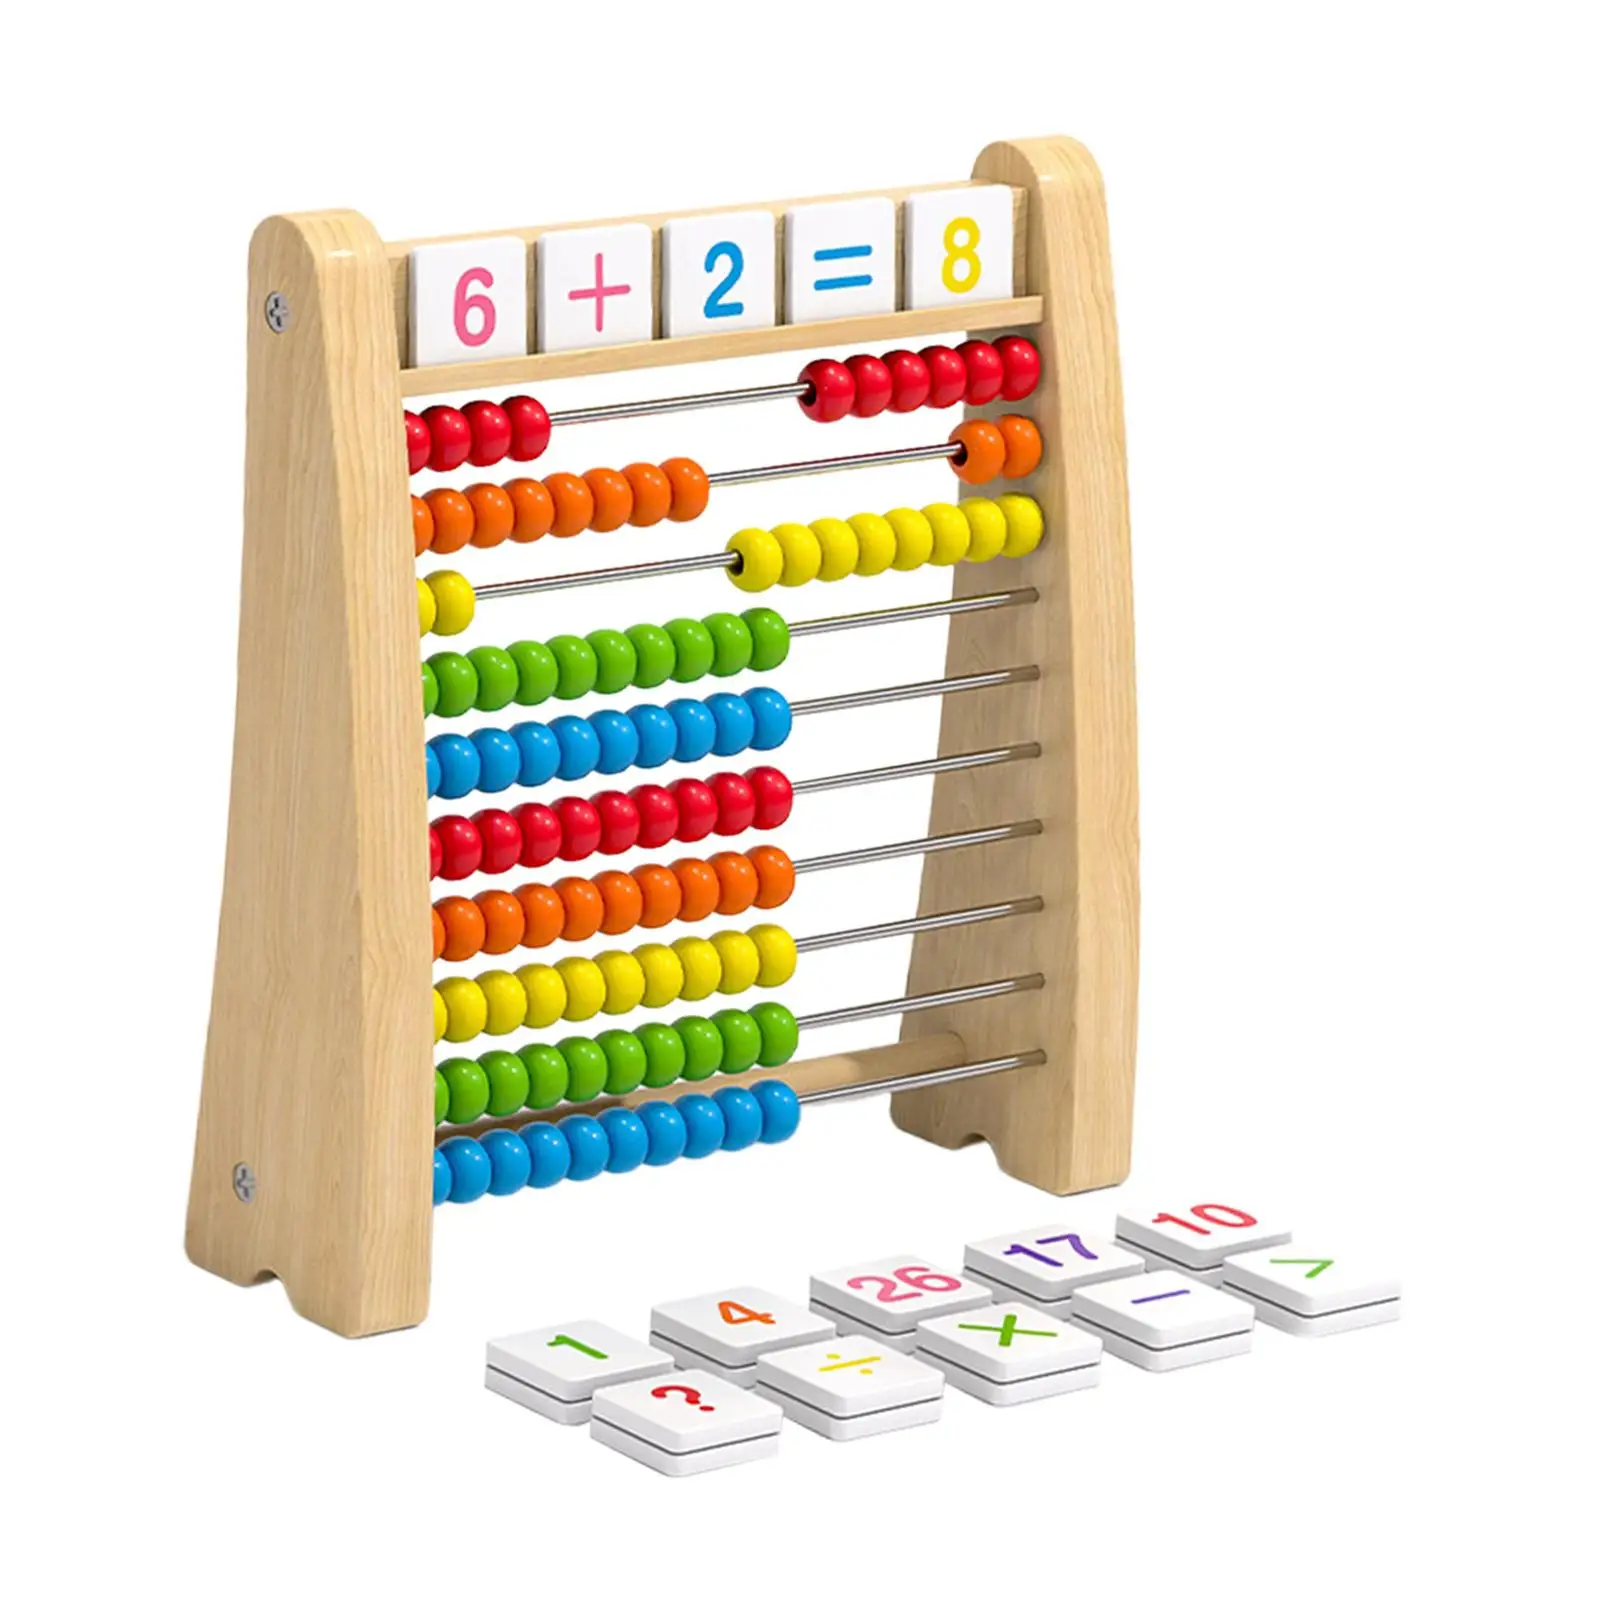 Classic Wooden Abacus Ten Frame Set Math Manipulatives for Kids Elementary